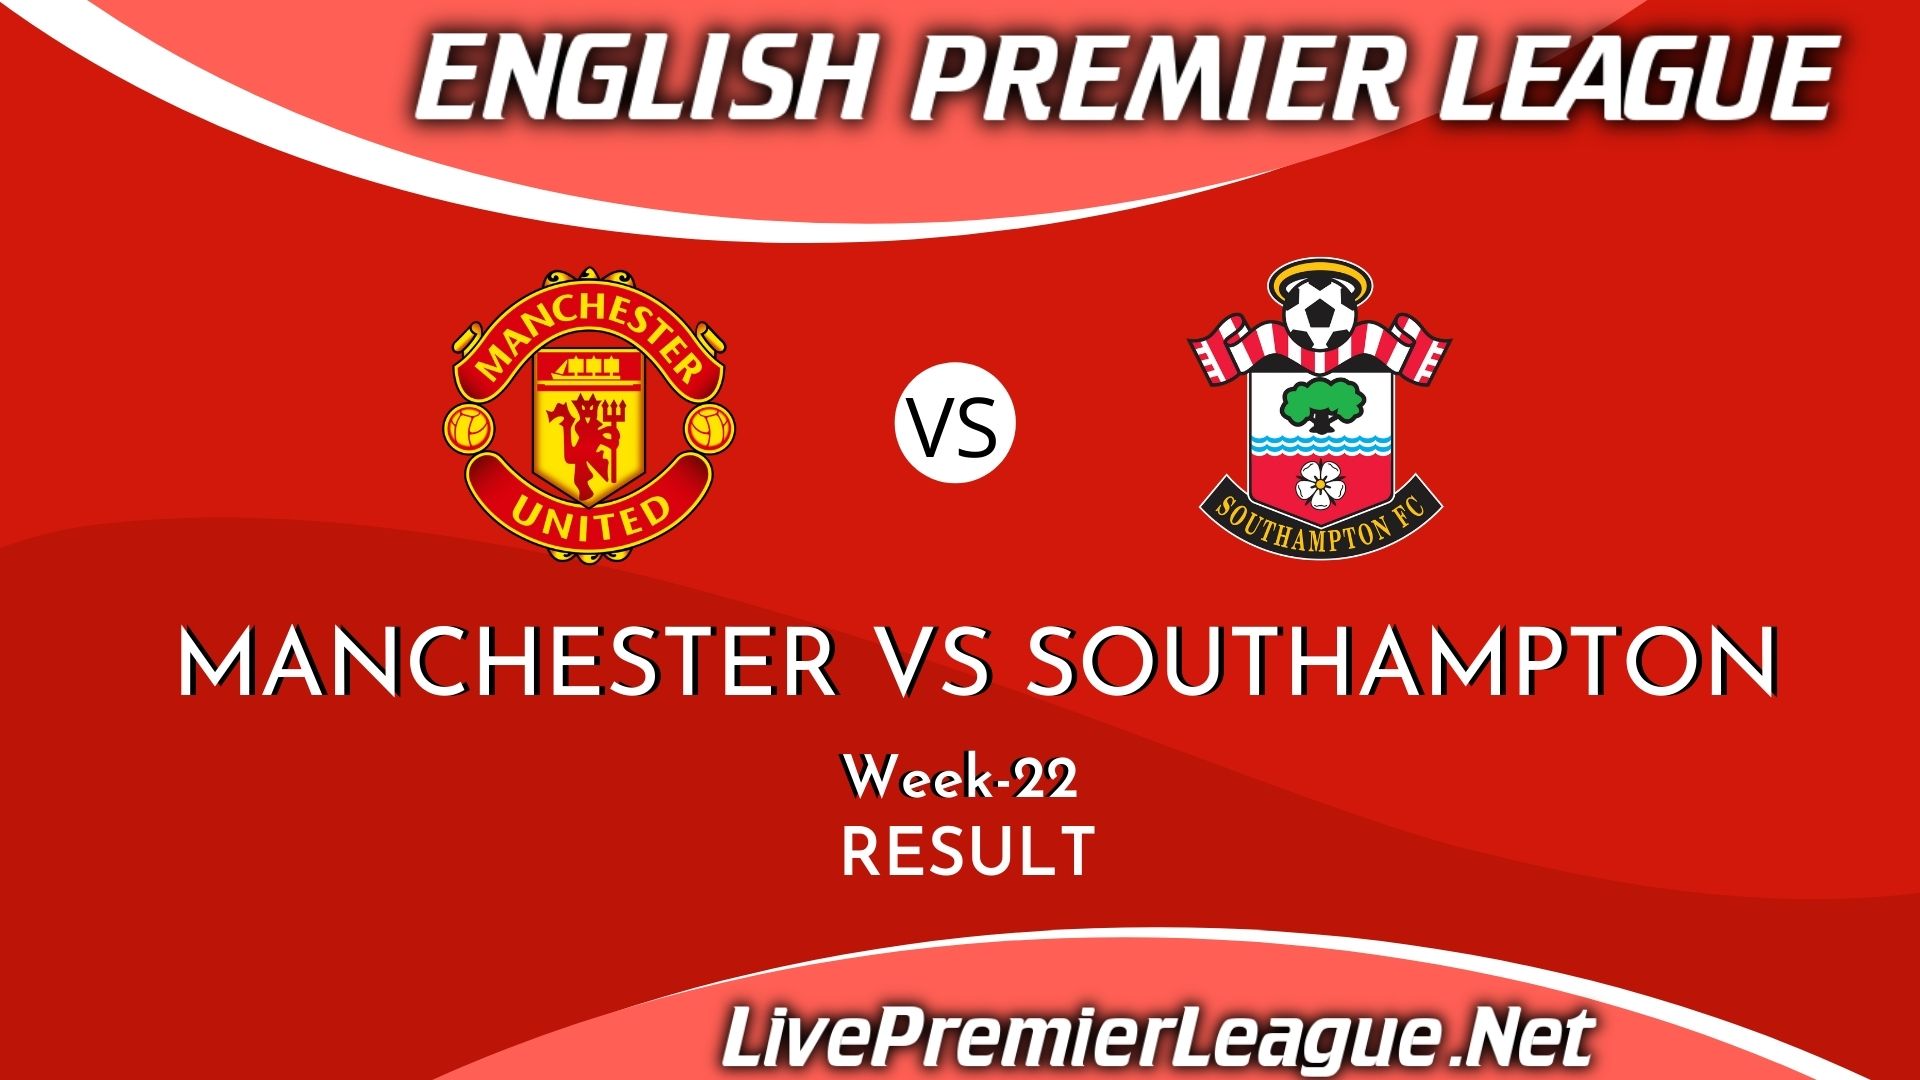 Manchester United Vs Southampton | Result 2021 EPL Week 22